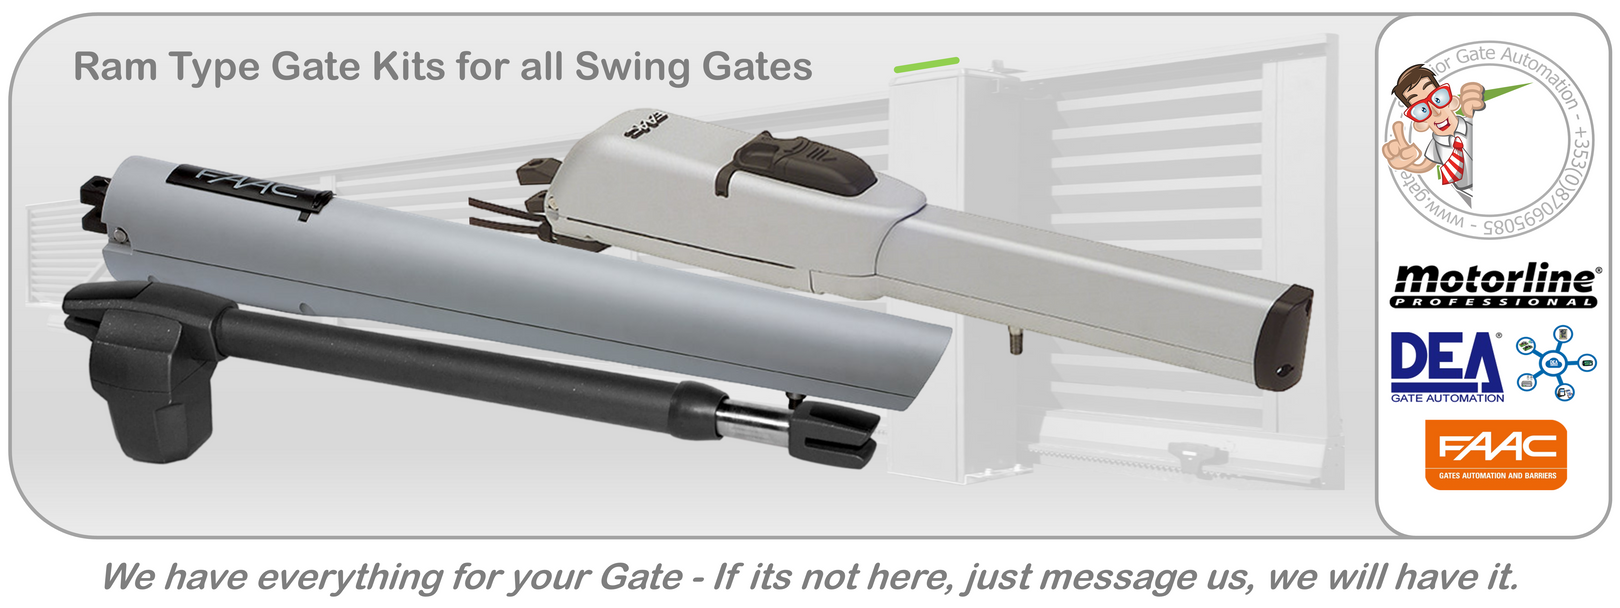 Ram Type Gate Kits for all Swing Gates